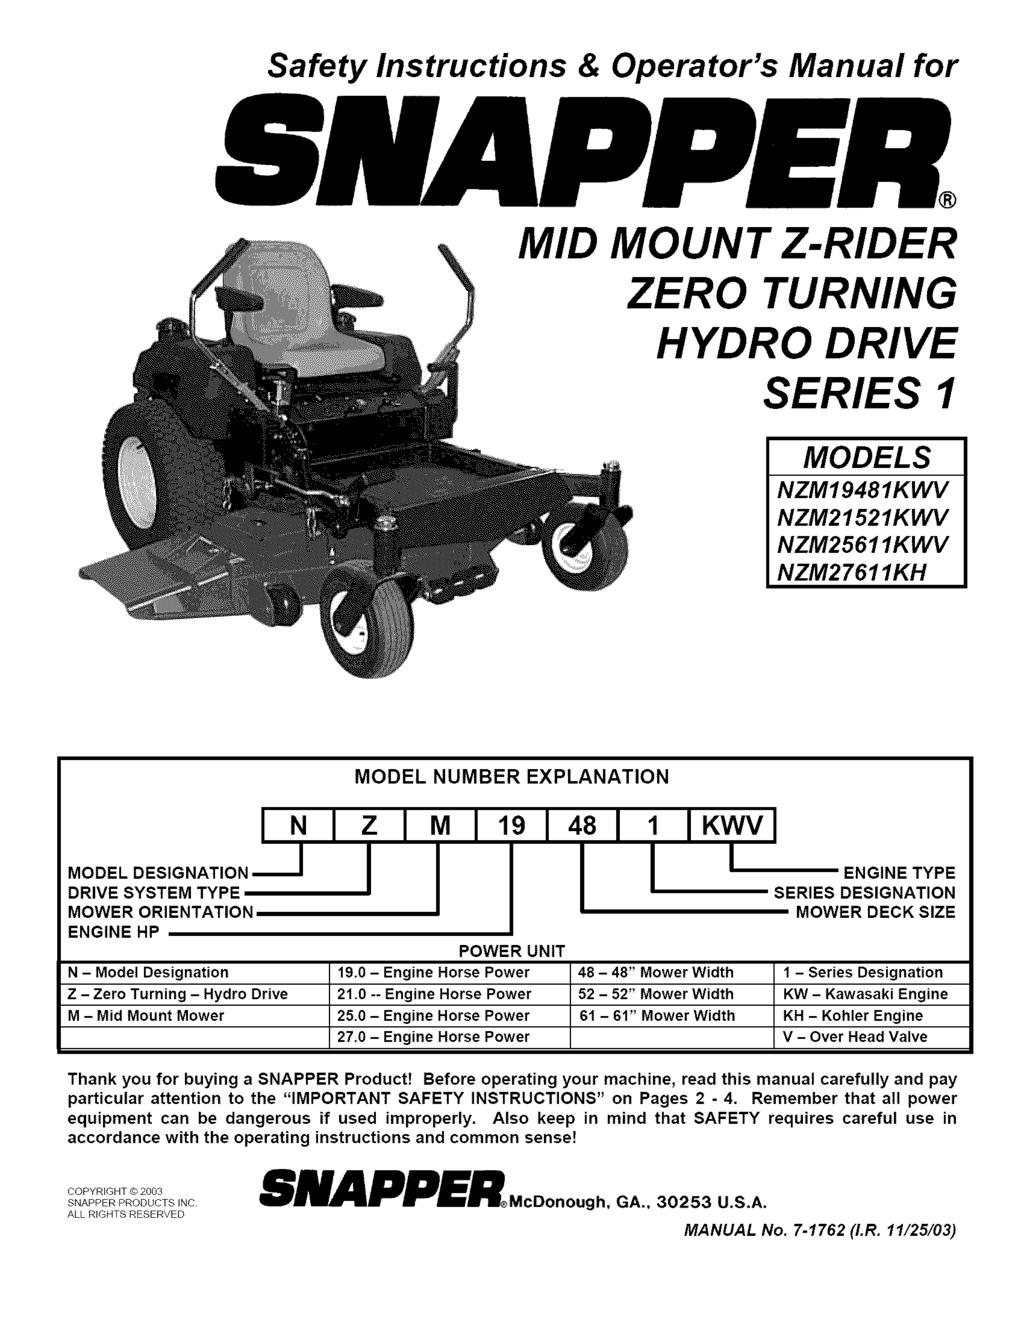 Safety Instructions & Operator's Manual for MID MOUNT Z-RIDER ZERO TURNING HYDRO DRIVE SERIES 1 MODELS NZM19481KWV NZM21521KWV NZM25611KWV NZM27611KH MODEL DESIGNATION DRIVE SYSTEM TYPE MOWER